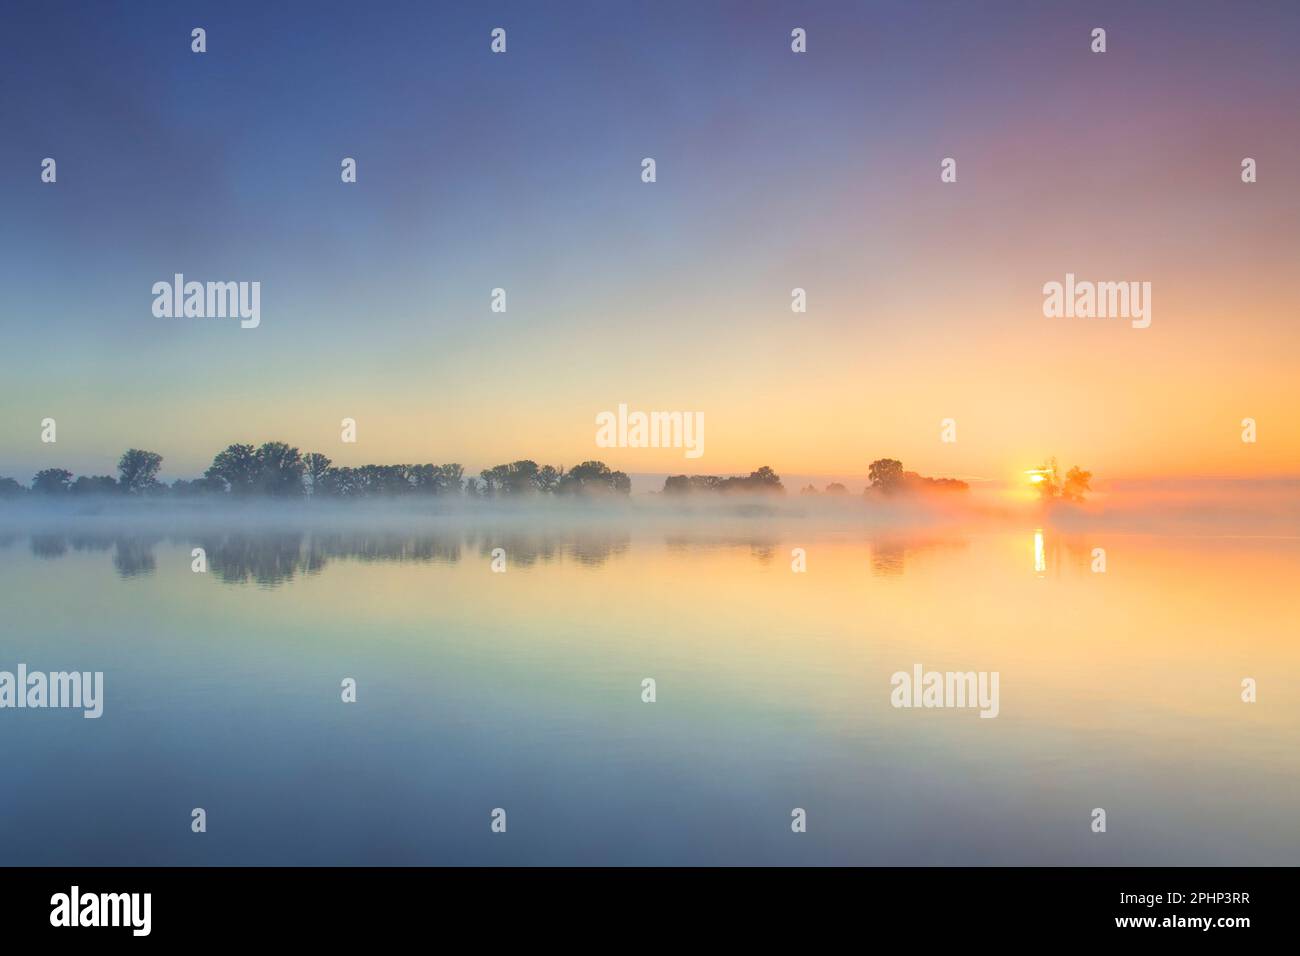 River Elbe covered in mist at dawn / sunrise at the Lower Saxon Elbe Valley Biosphere Reserve in summer, Lower Saxony / Niedersachsen, Germany Stock Photo